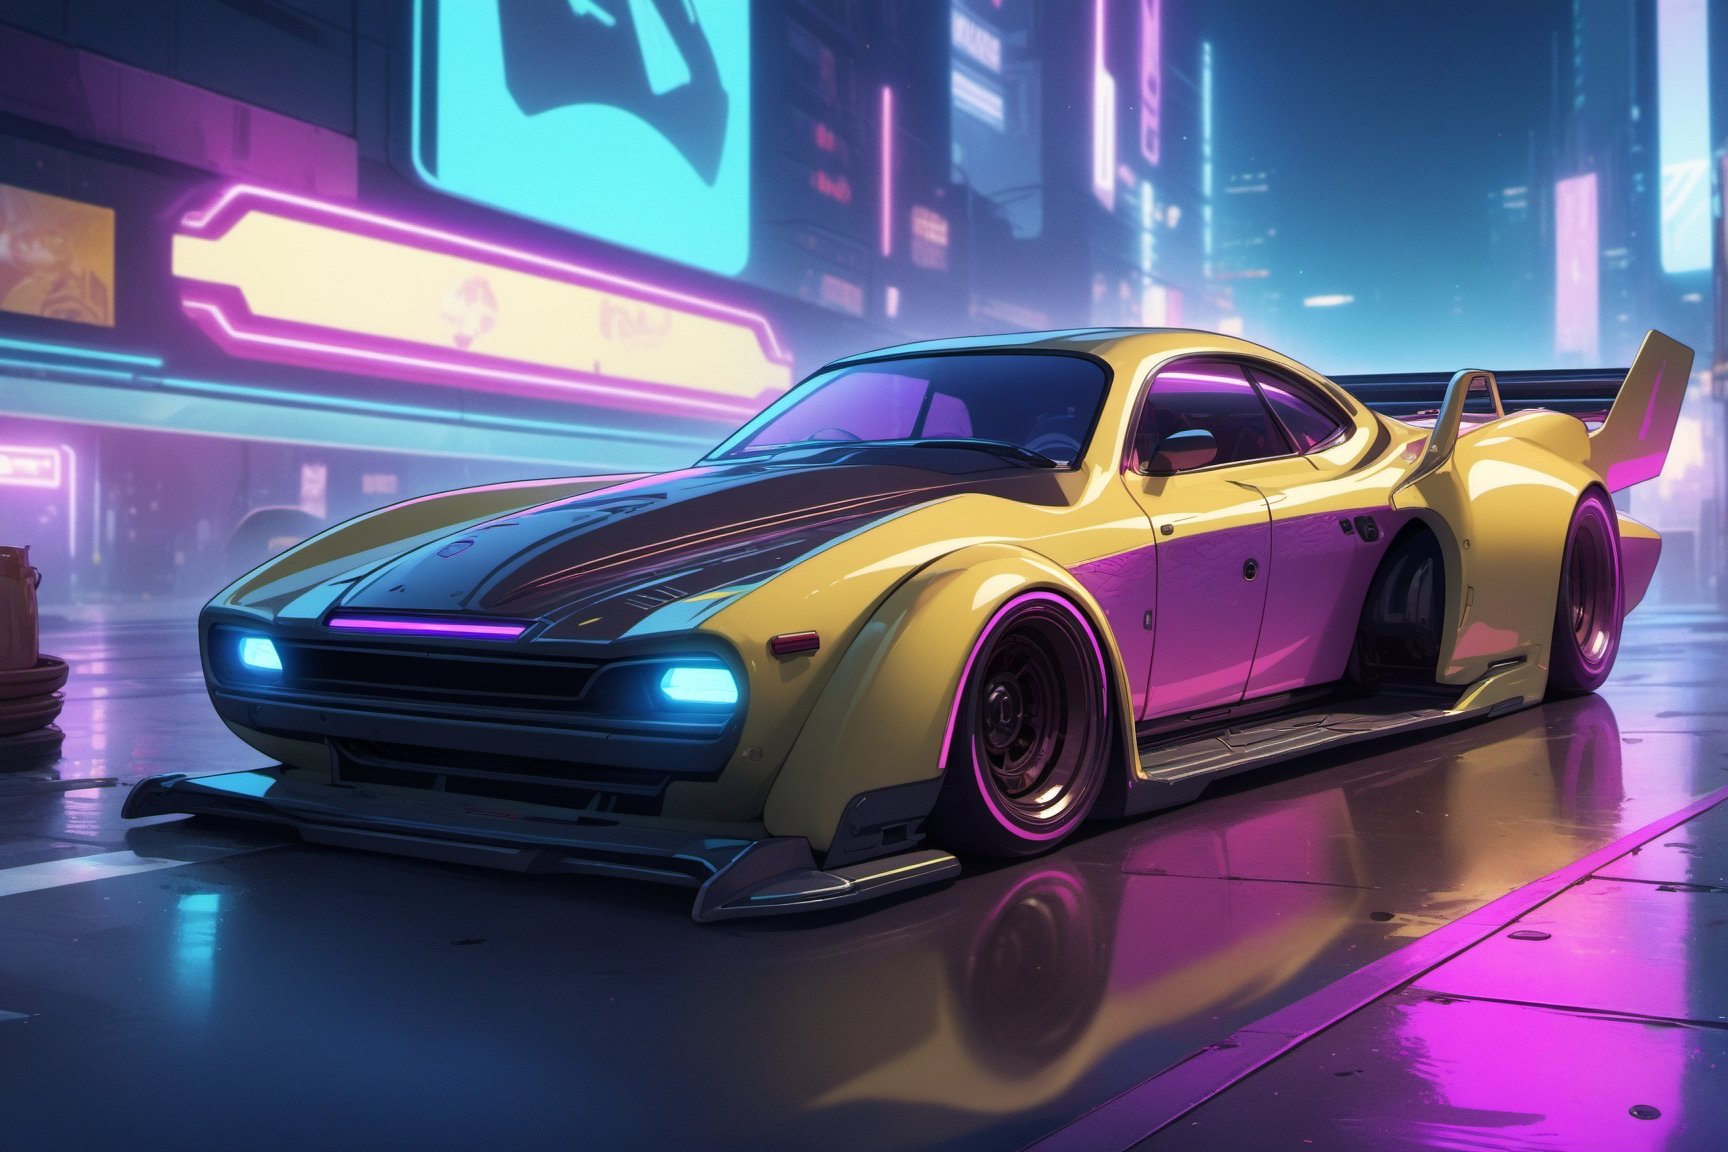 Cyberpunk, neon lights, dragster car, cyberpunk car, night, detailed background

masterpiece, best quality, ultra-detailed, very aesthetic, illustration, perfect composition, intricate details, absurdres, no humans,